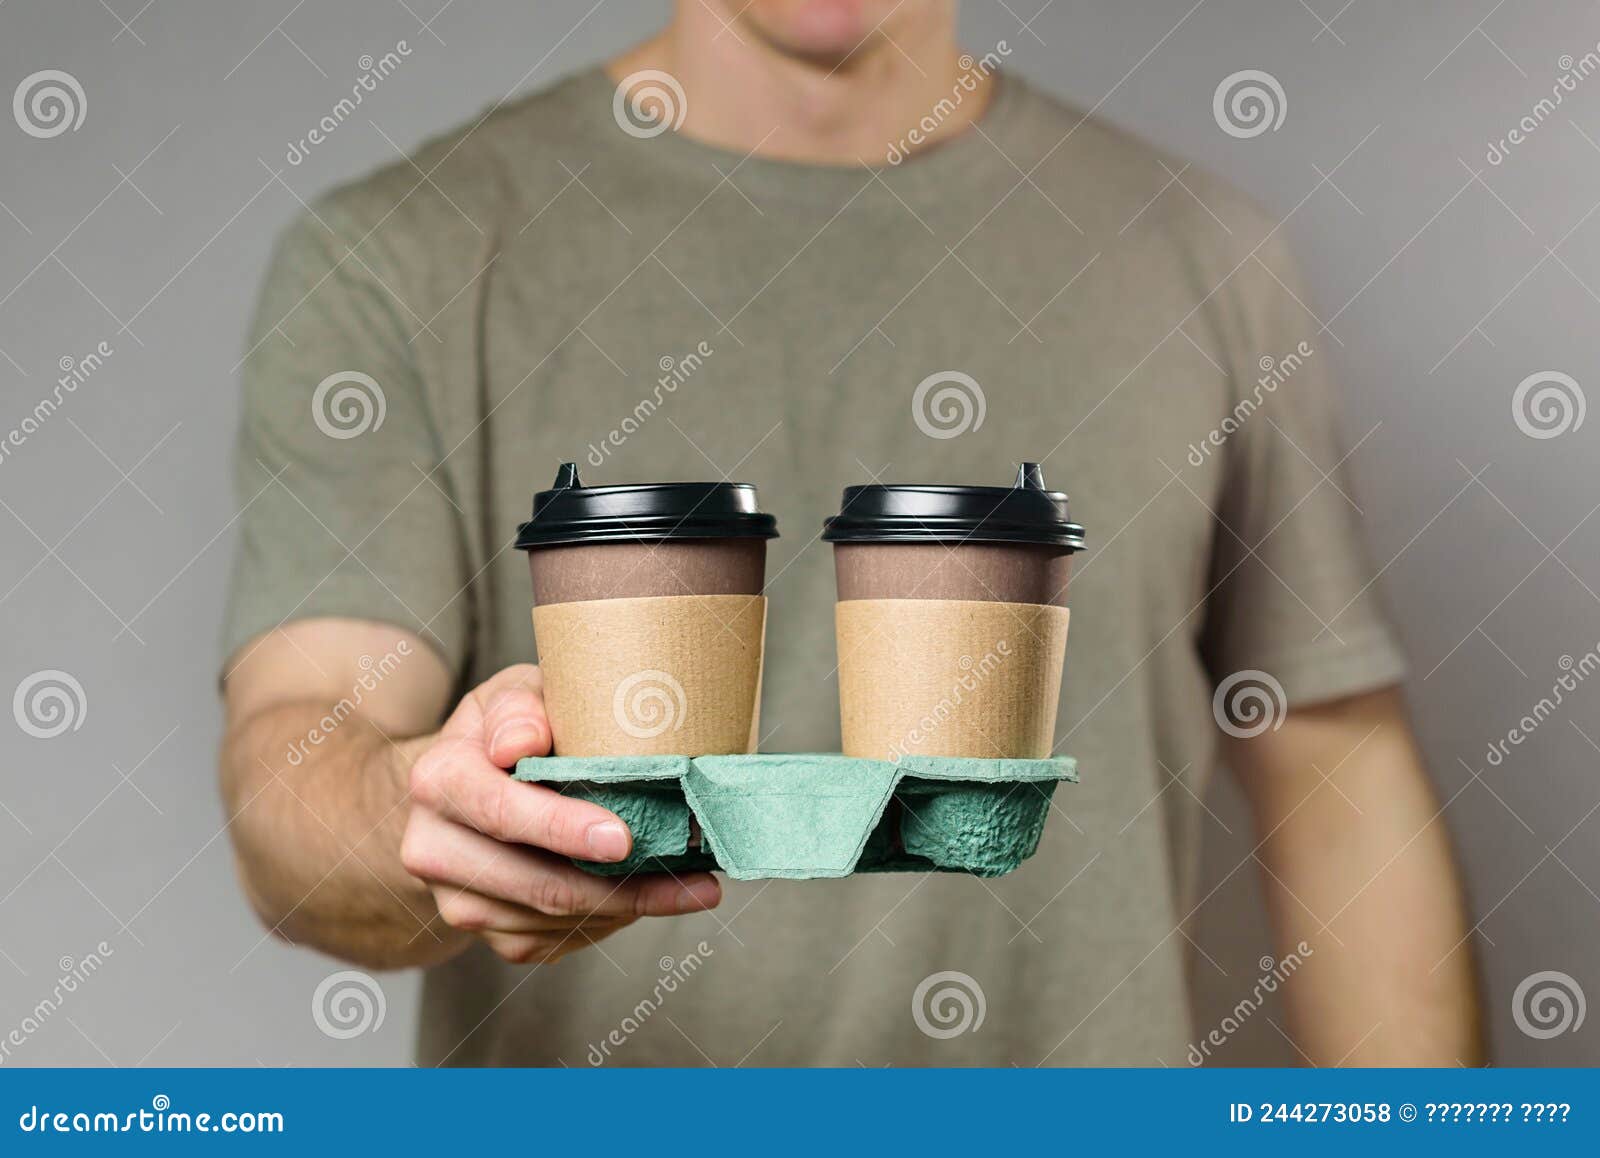 https://thumbs.dreamstime.com/z/man-holds-cardboard-cup-holder-two-disposable-coffee-cups-man-holds-cardboard-cup-holder-two-disposable-coffee-244273058.jpg